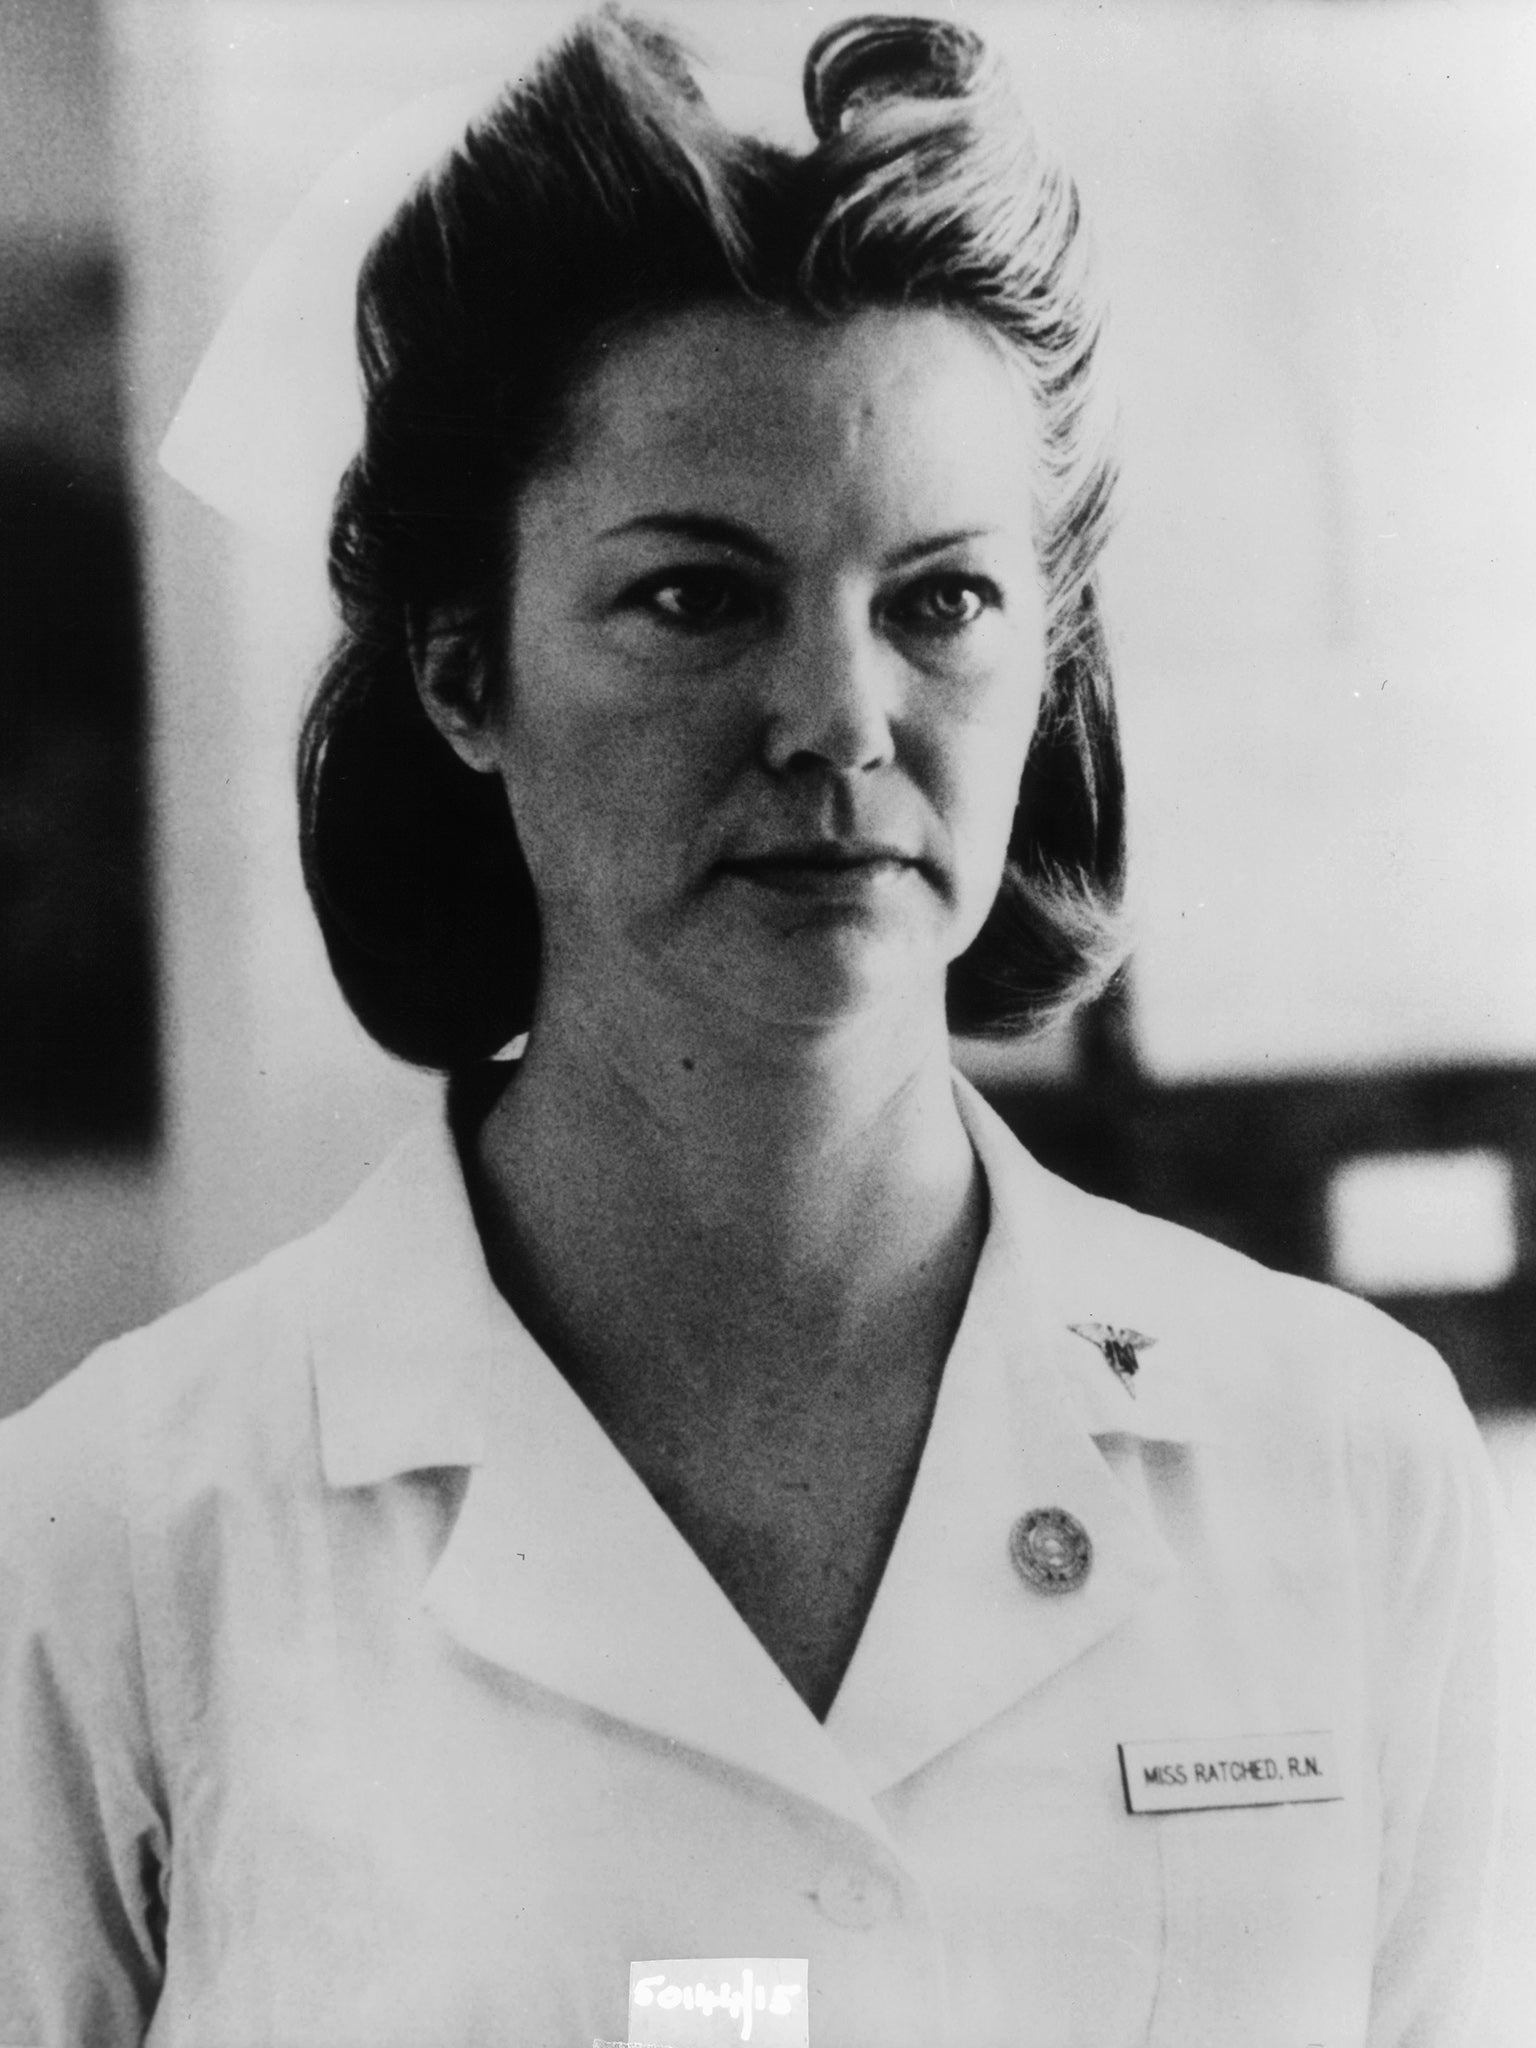 Fletcher as the cruel and sadistic Nurse Ratched in psychological drama ‘One Flew Over the Cuckoo’s Nest’